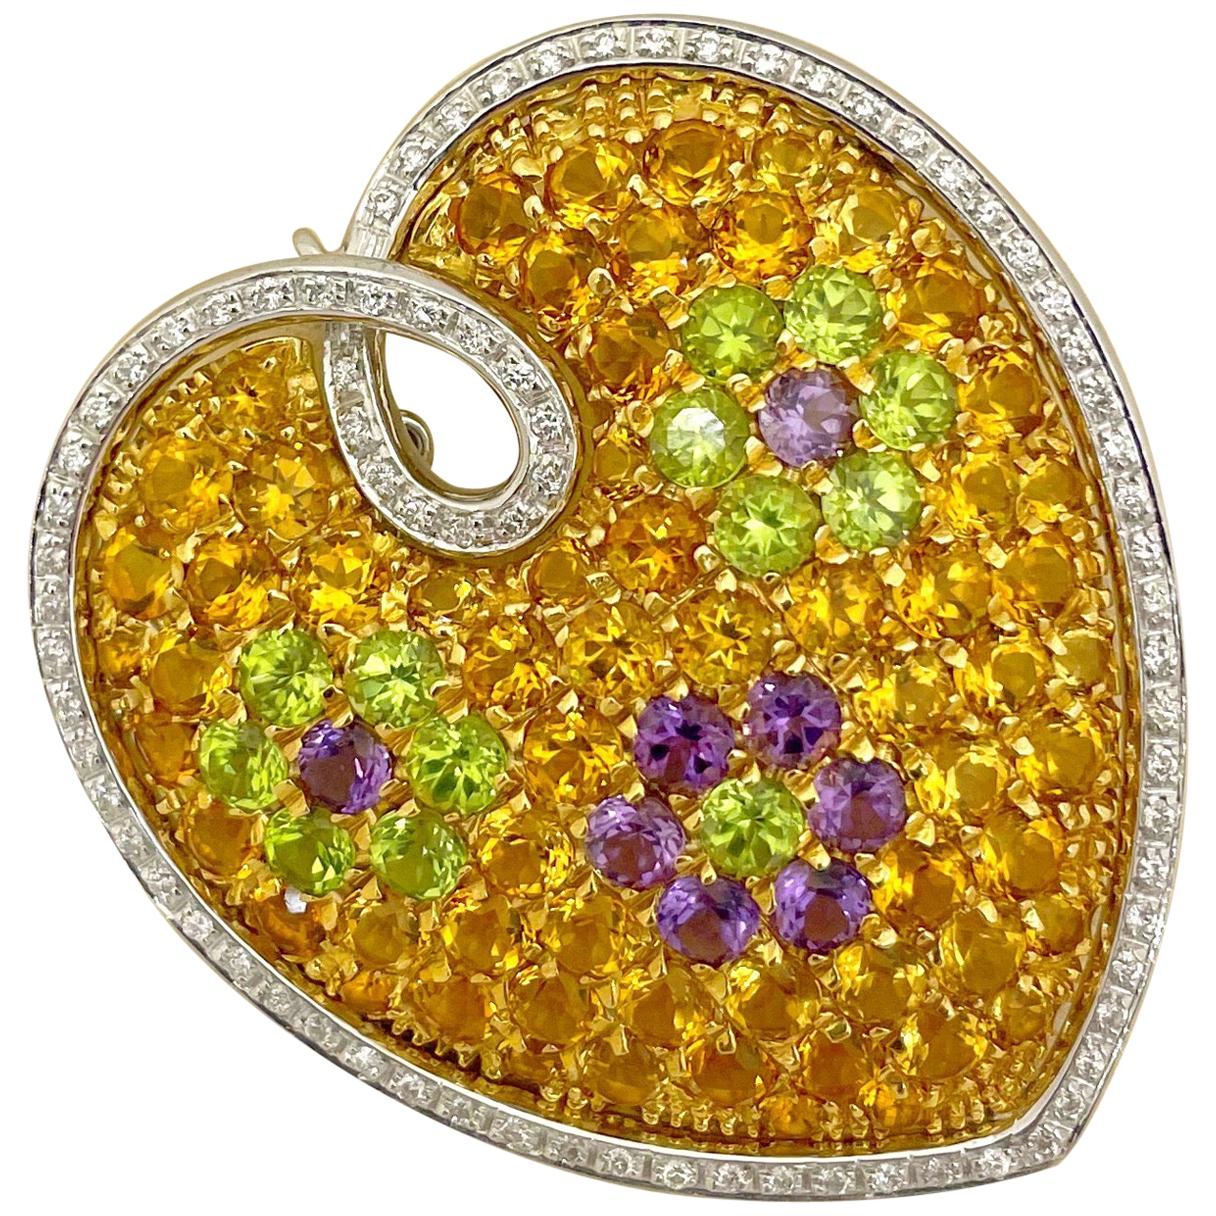 18KT Yellow and White Gold Semi-Precious Stone Puffed Heart Brooch with Diamonds